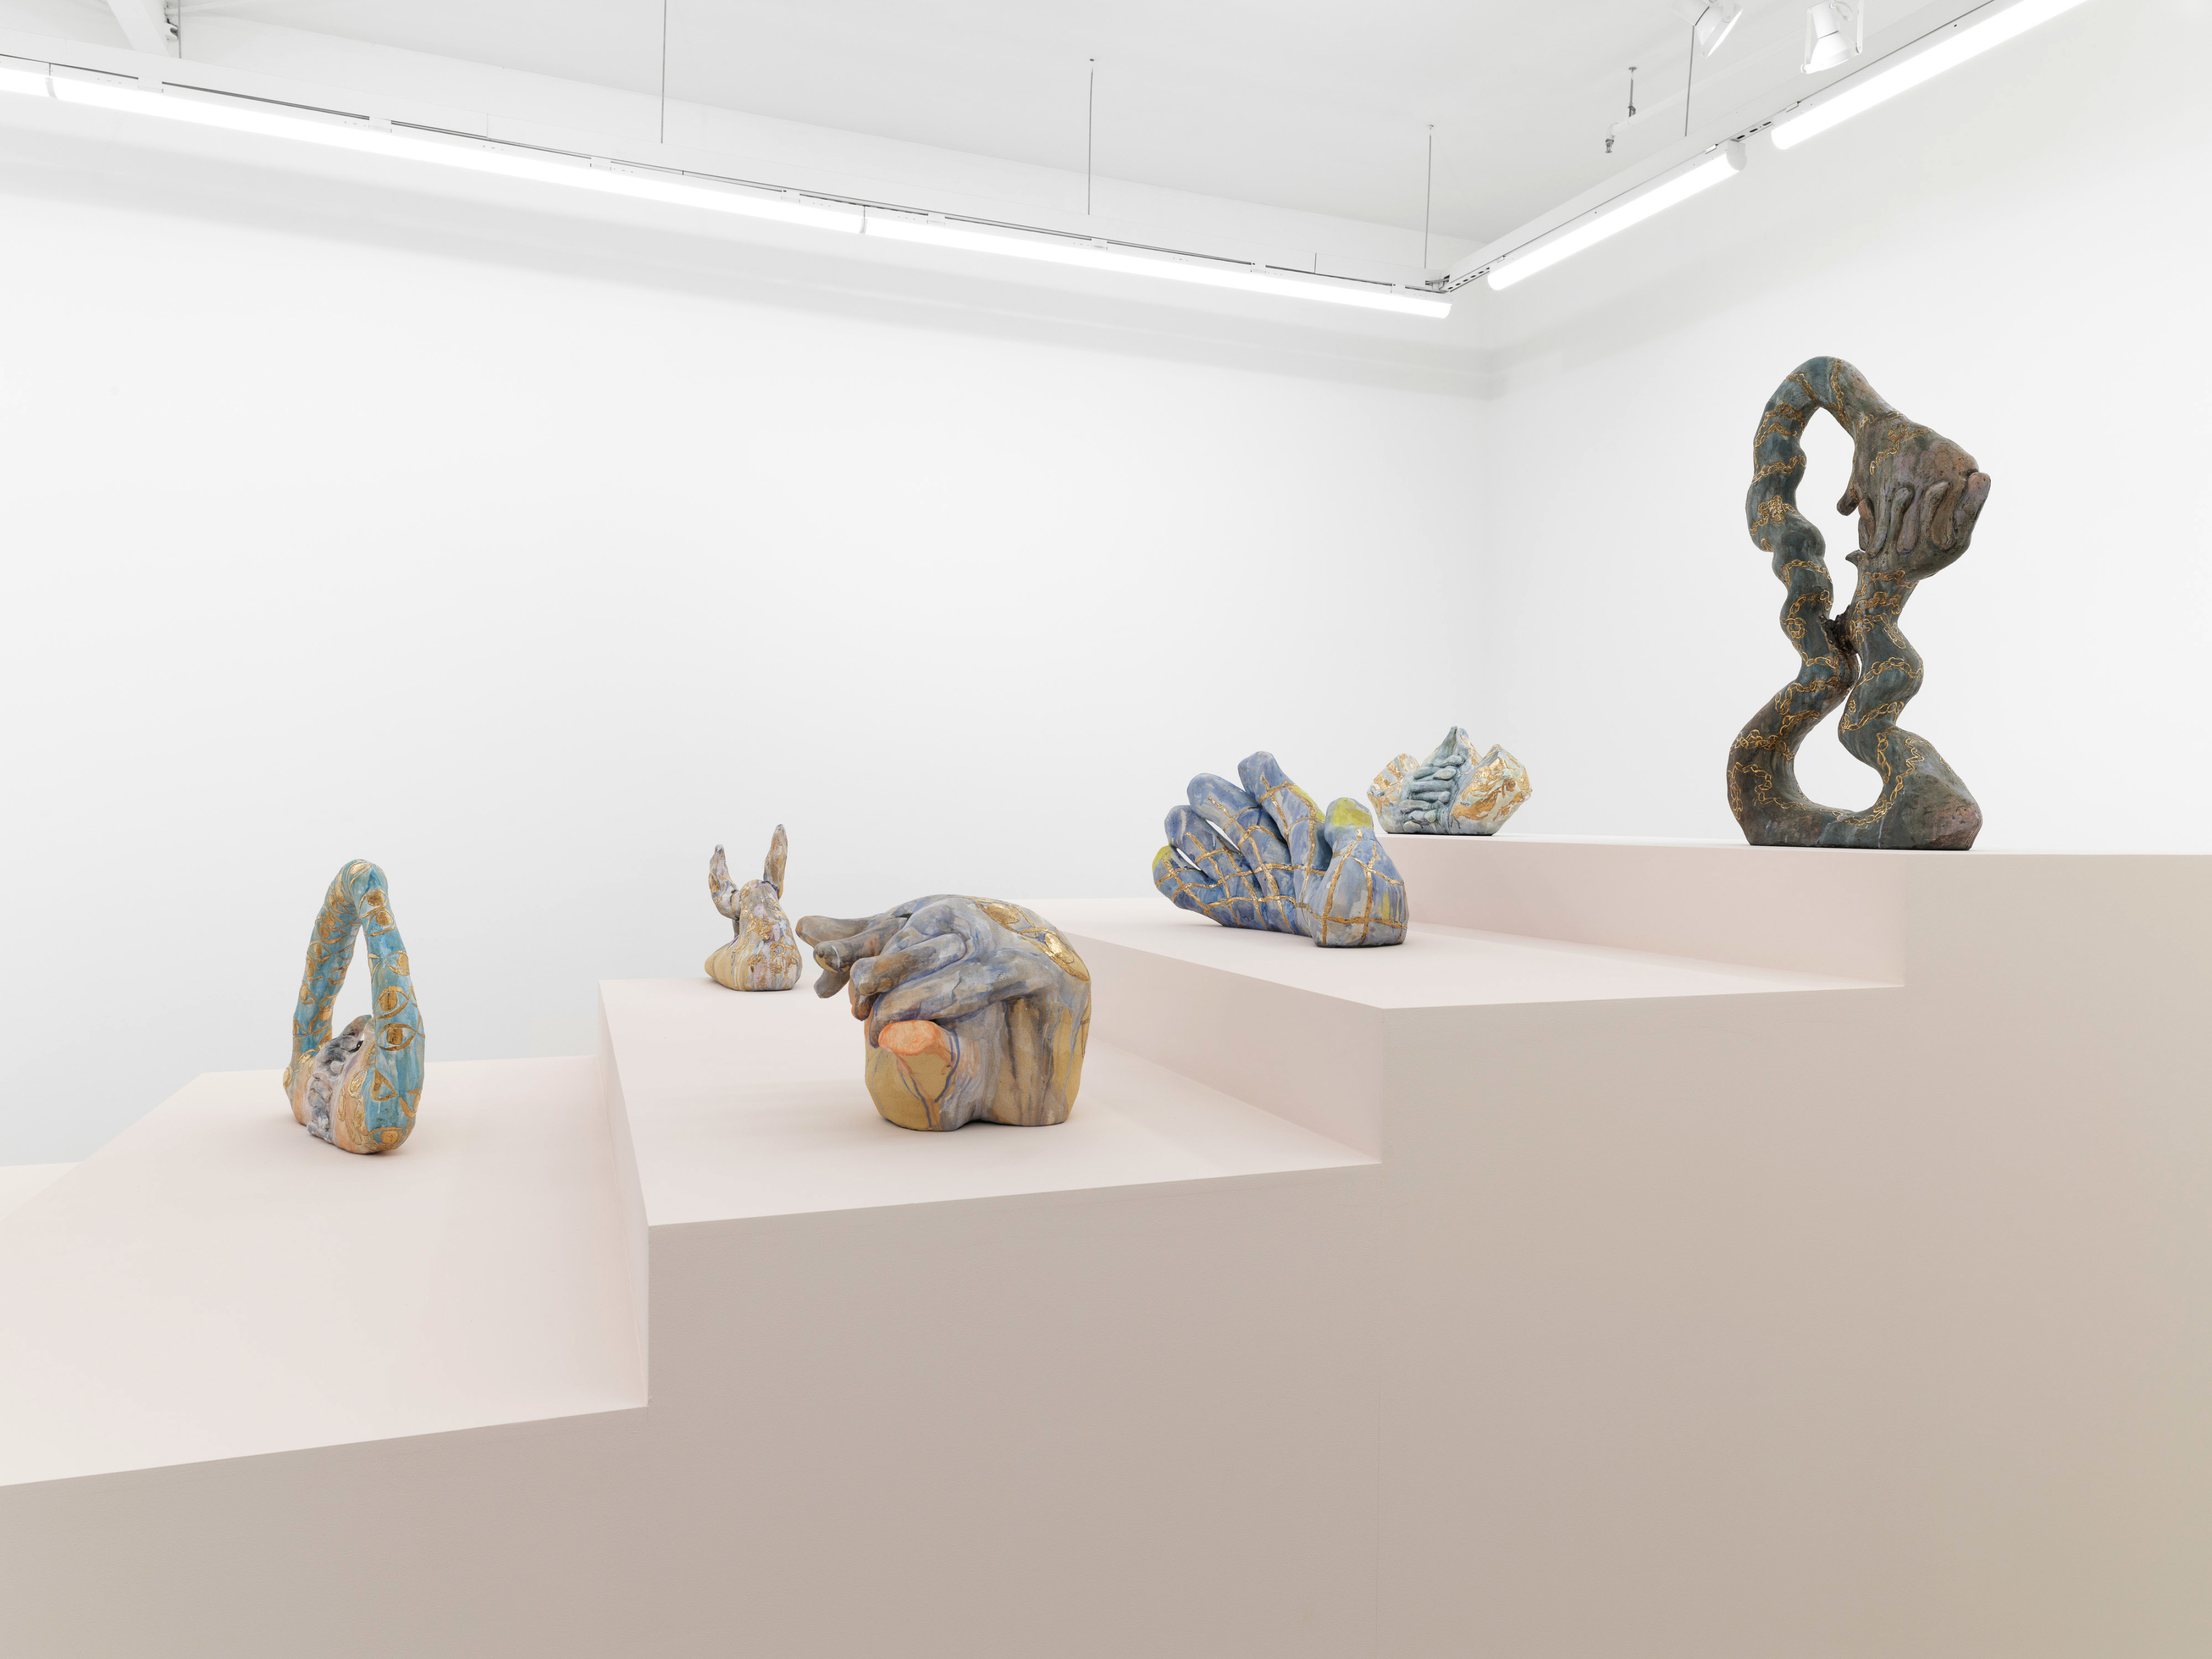 Installation view of Julia Haft-Candell's exhibition of ceramic sculptures